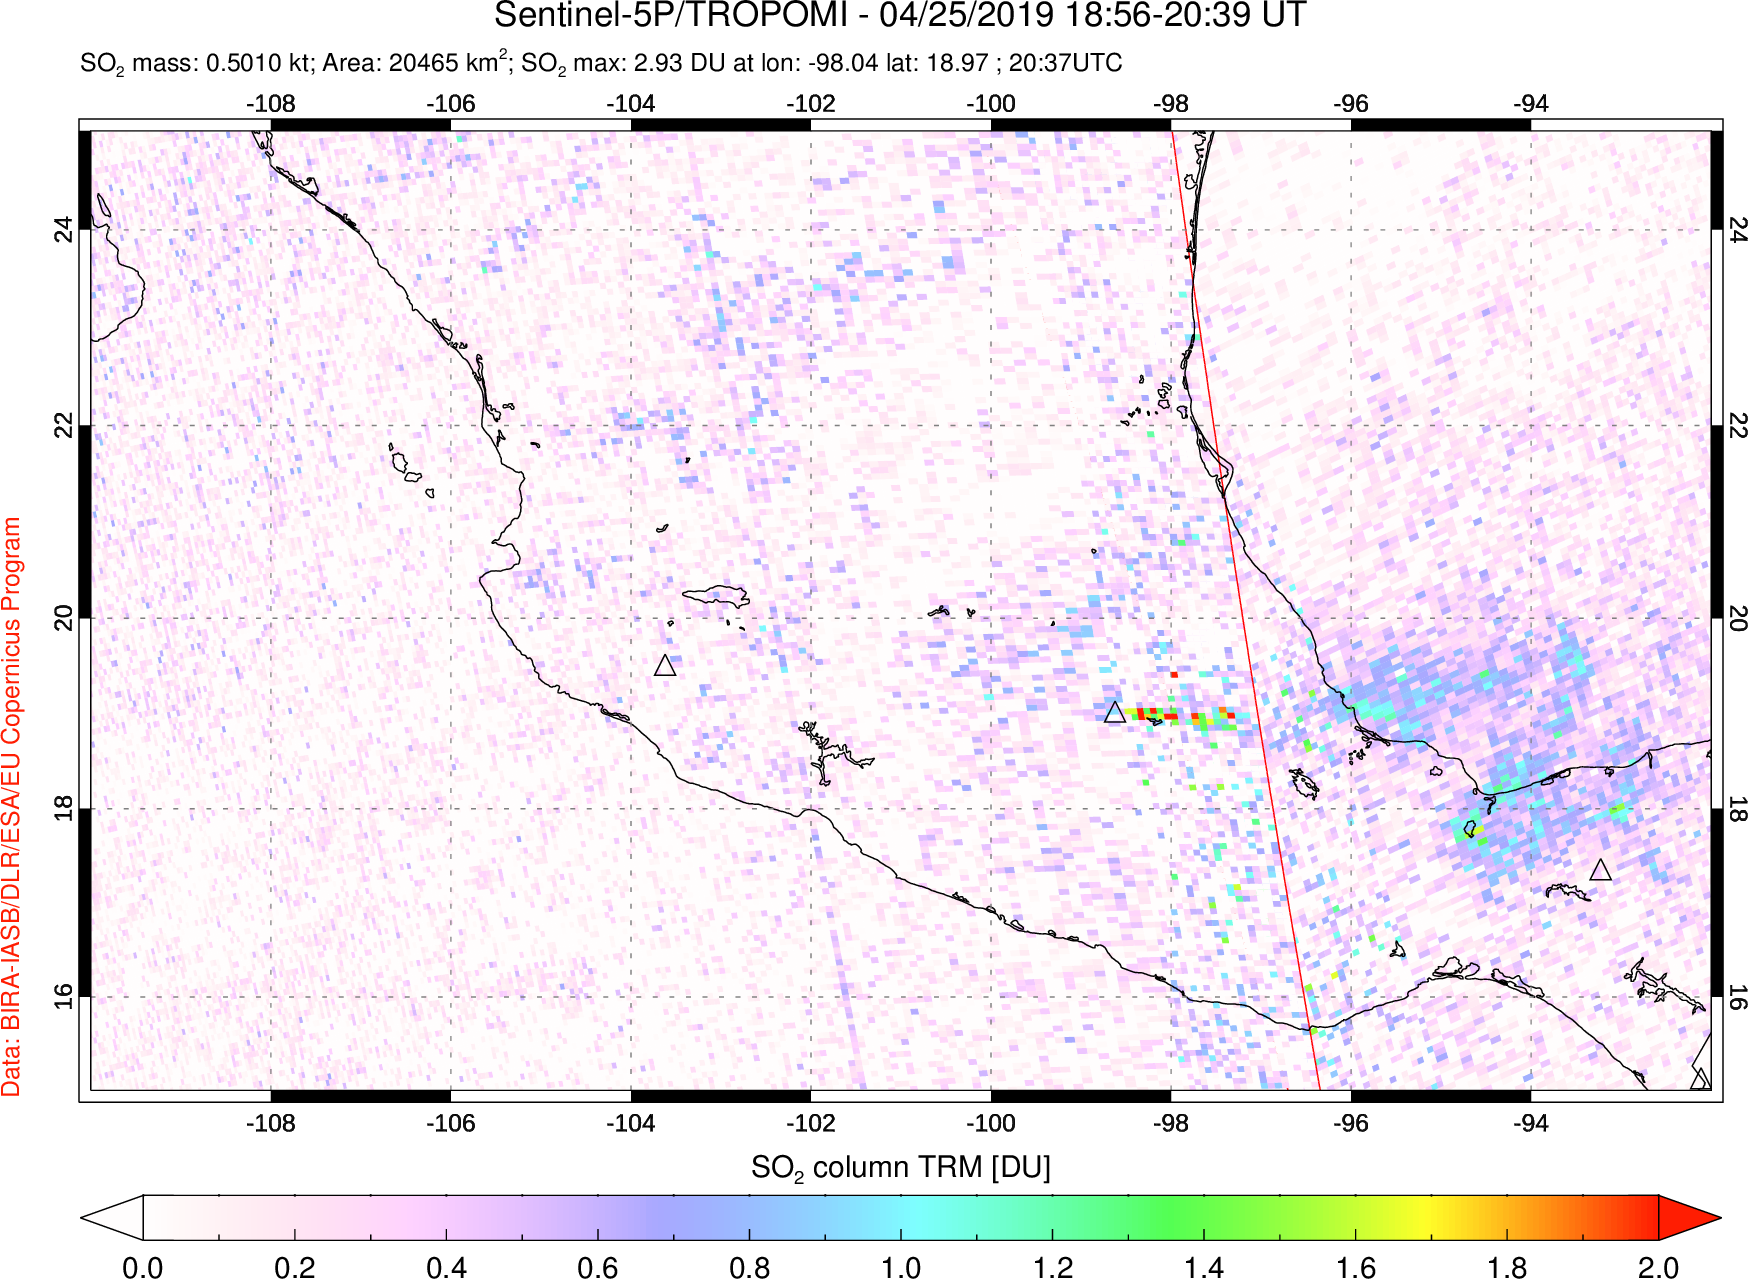 A sulfur dioxide image over Mexico on Apr 25, 2019.